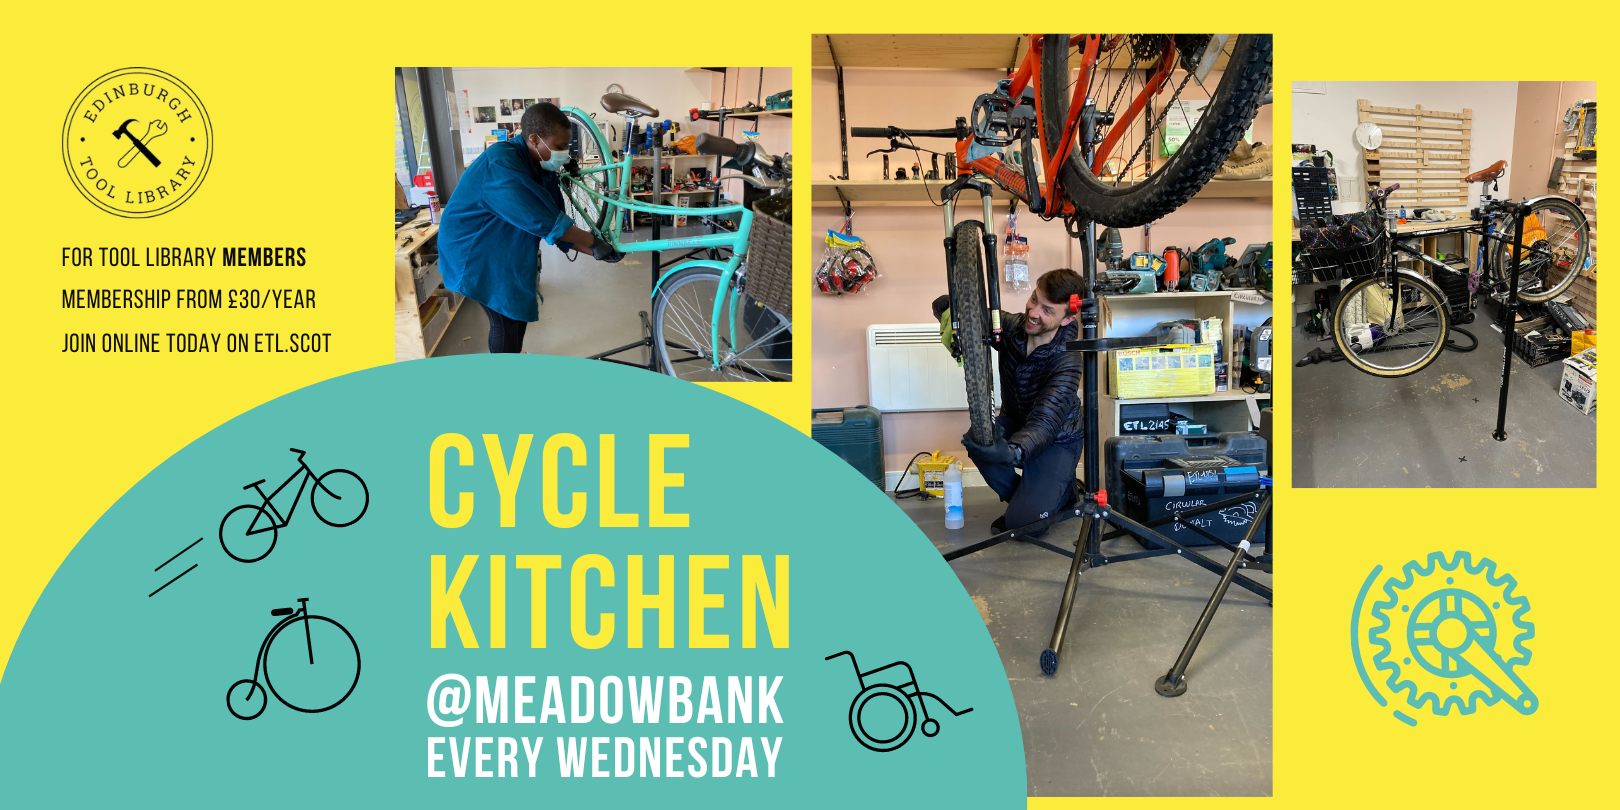 Cycle Kitchen at Meadowbank every Wednesday. For Tool Library Members, membership from £30/yr, join online today etl.scot!